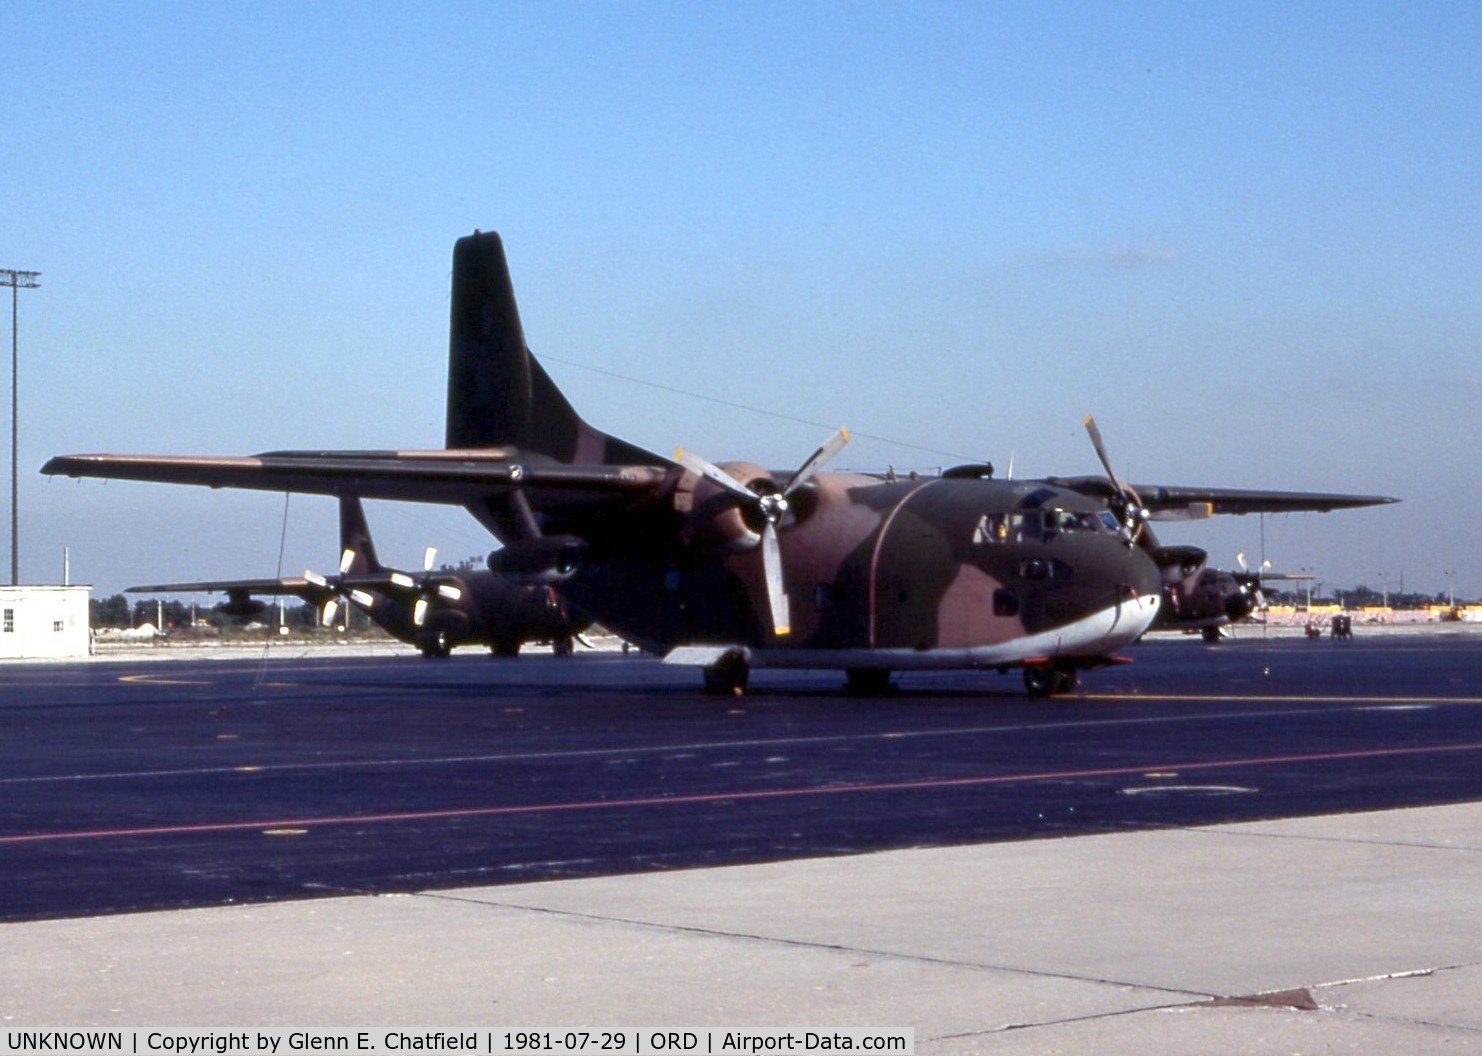 UNKNOWN, , C-123K at the ANG ramp, seen from KC-135 cockpit